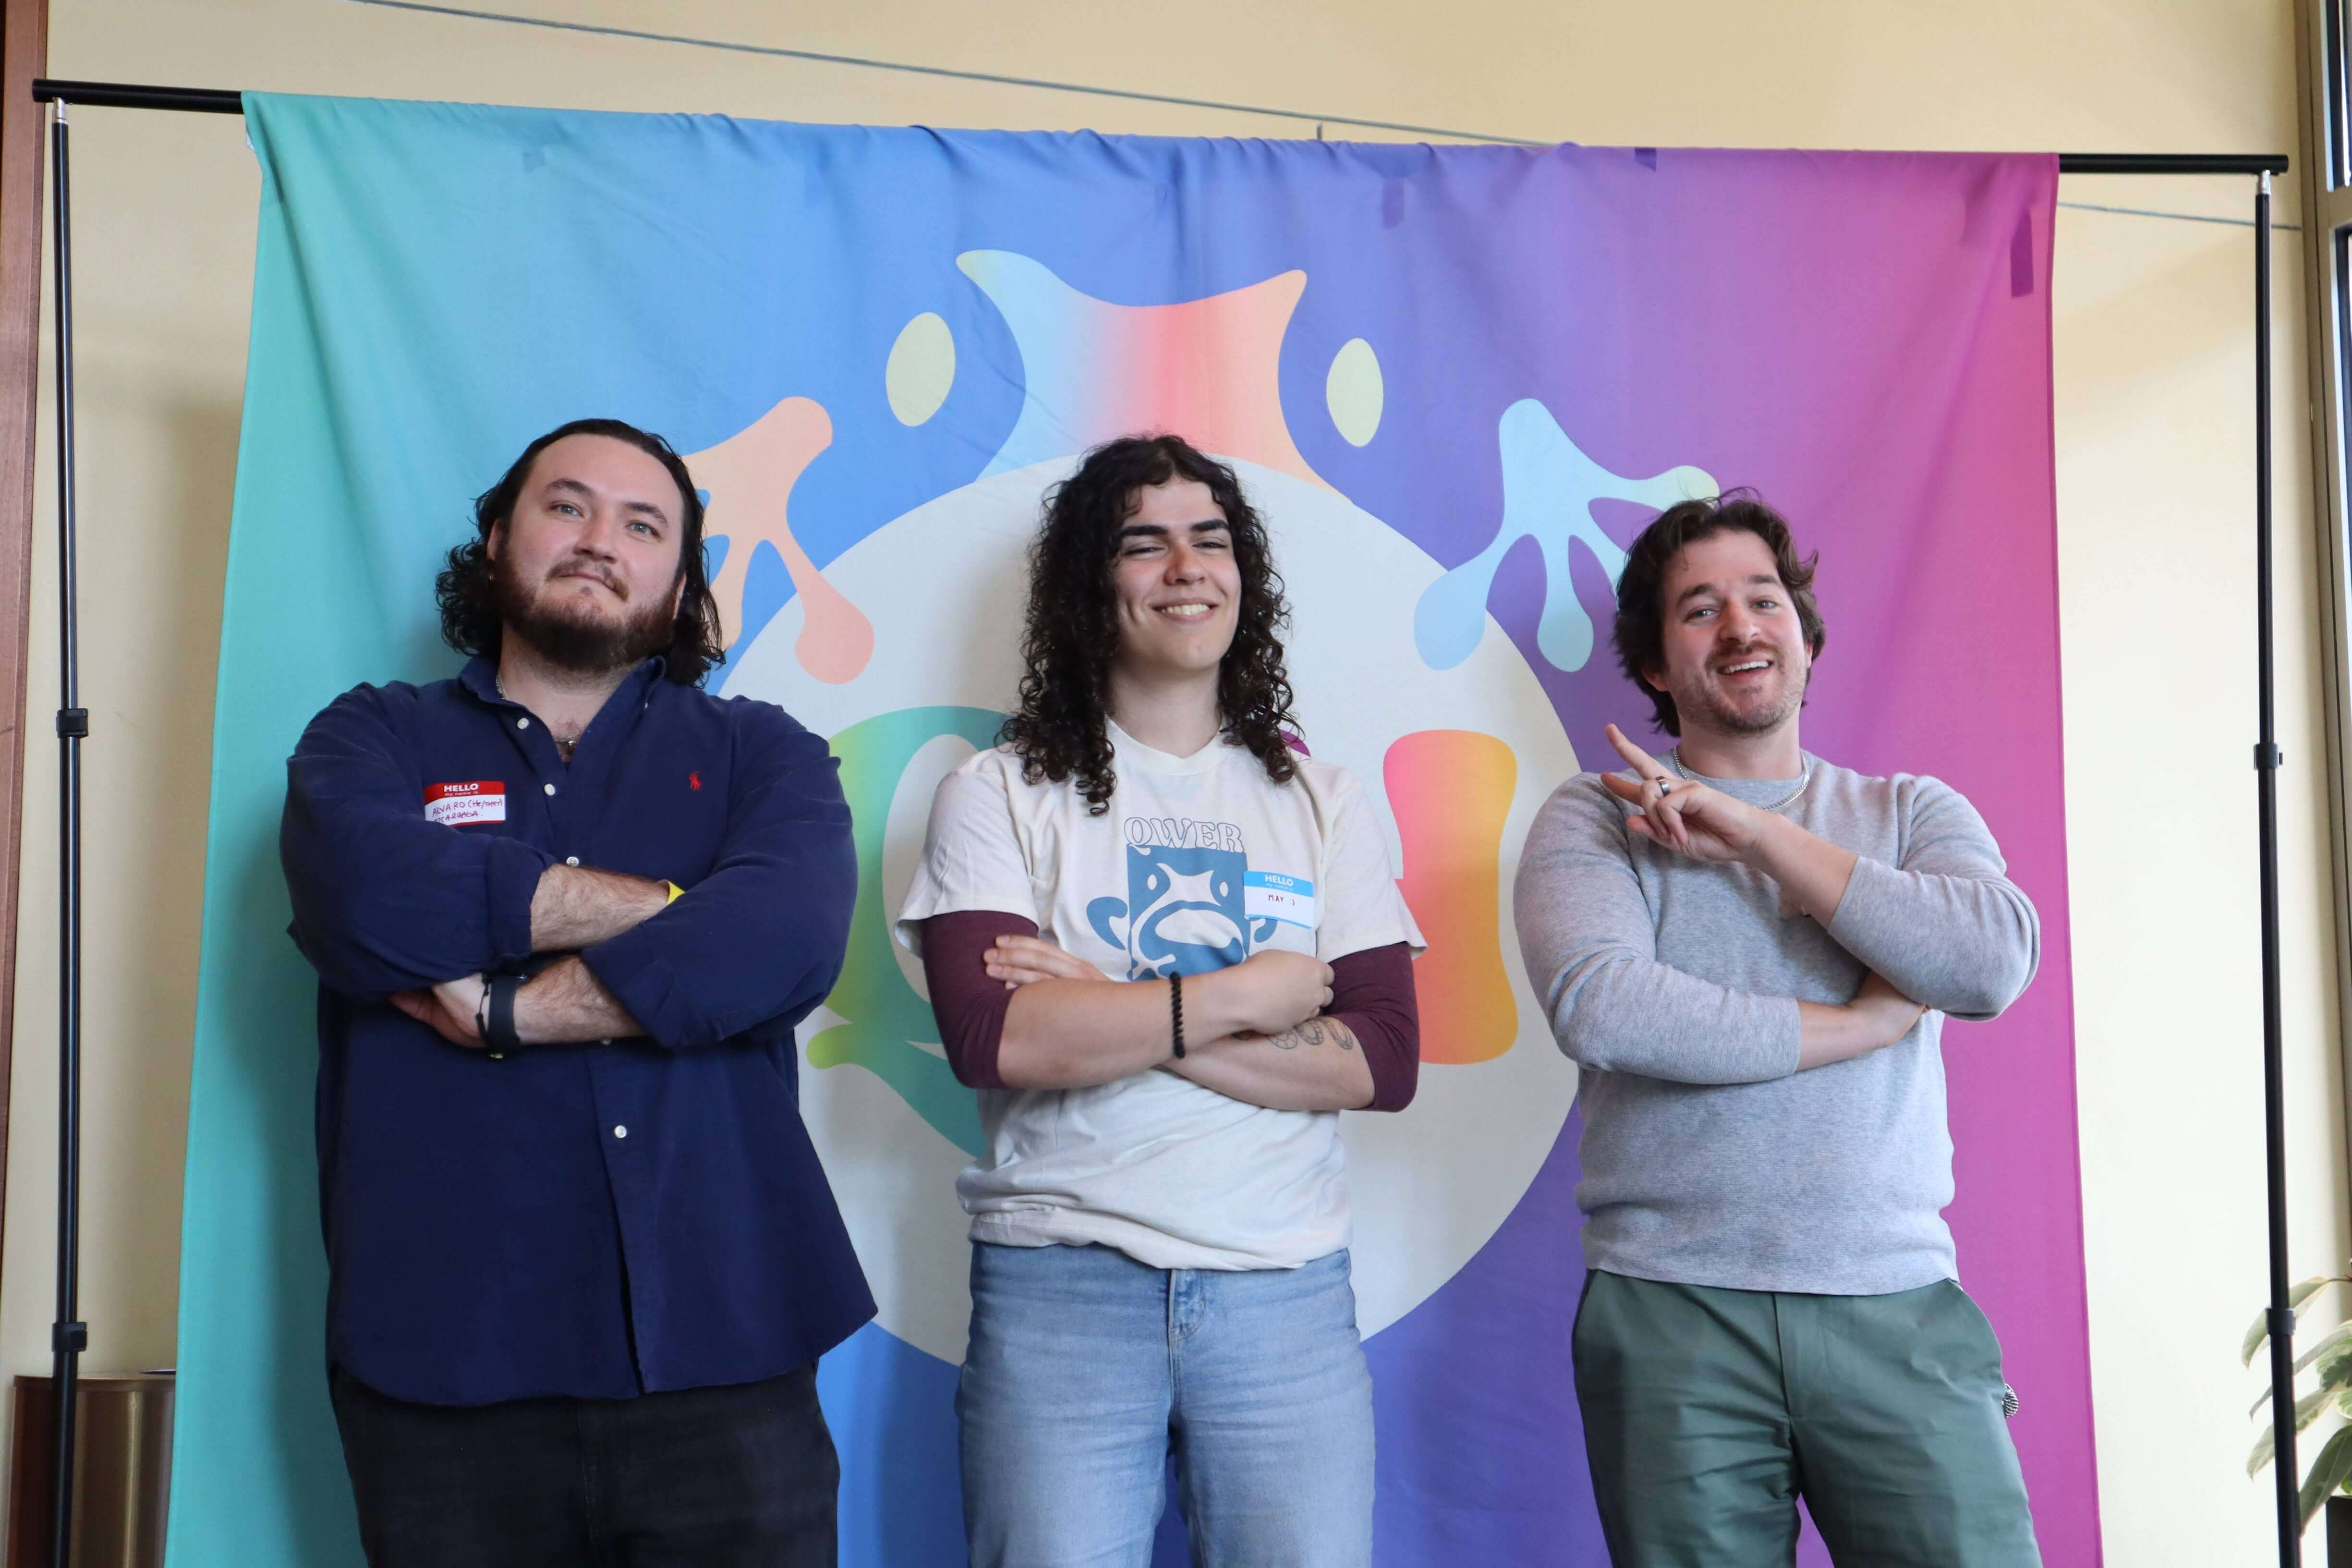 Three people posing with crossed arms in front of a colorful banner with abstract designs. From left to right: a person with a beard and long hair, wearing a navy shirt; a person with curly shoulder-length hair in a white T-shirt with a blue frog graphic; and a person with short wavy hair in a grey sweater. They all appear cheerful.